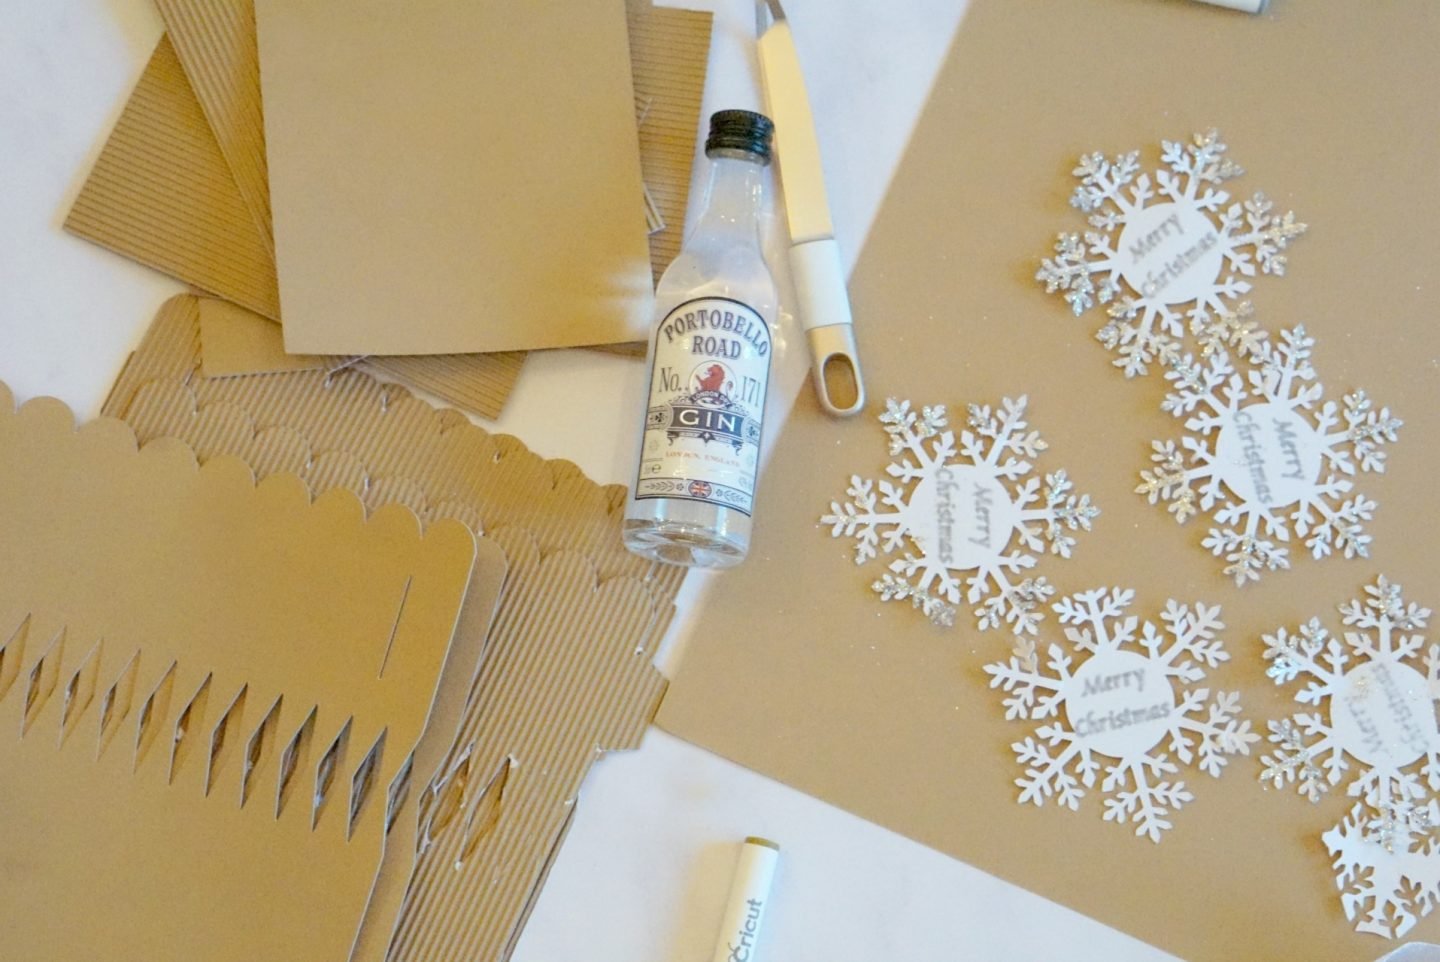 Make your own Gin Christmas Crackers with this easy to follow Christmas cracker template www.extraordinarychaos.com